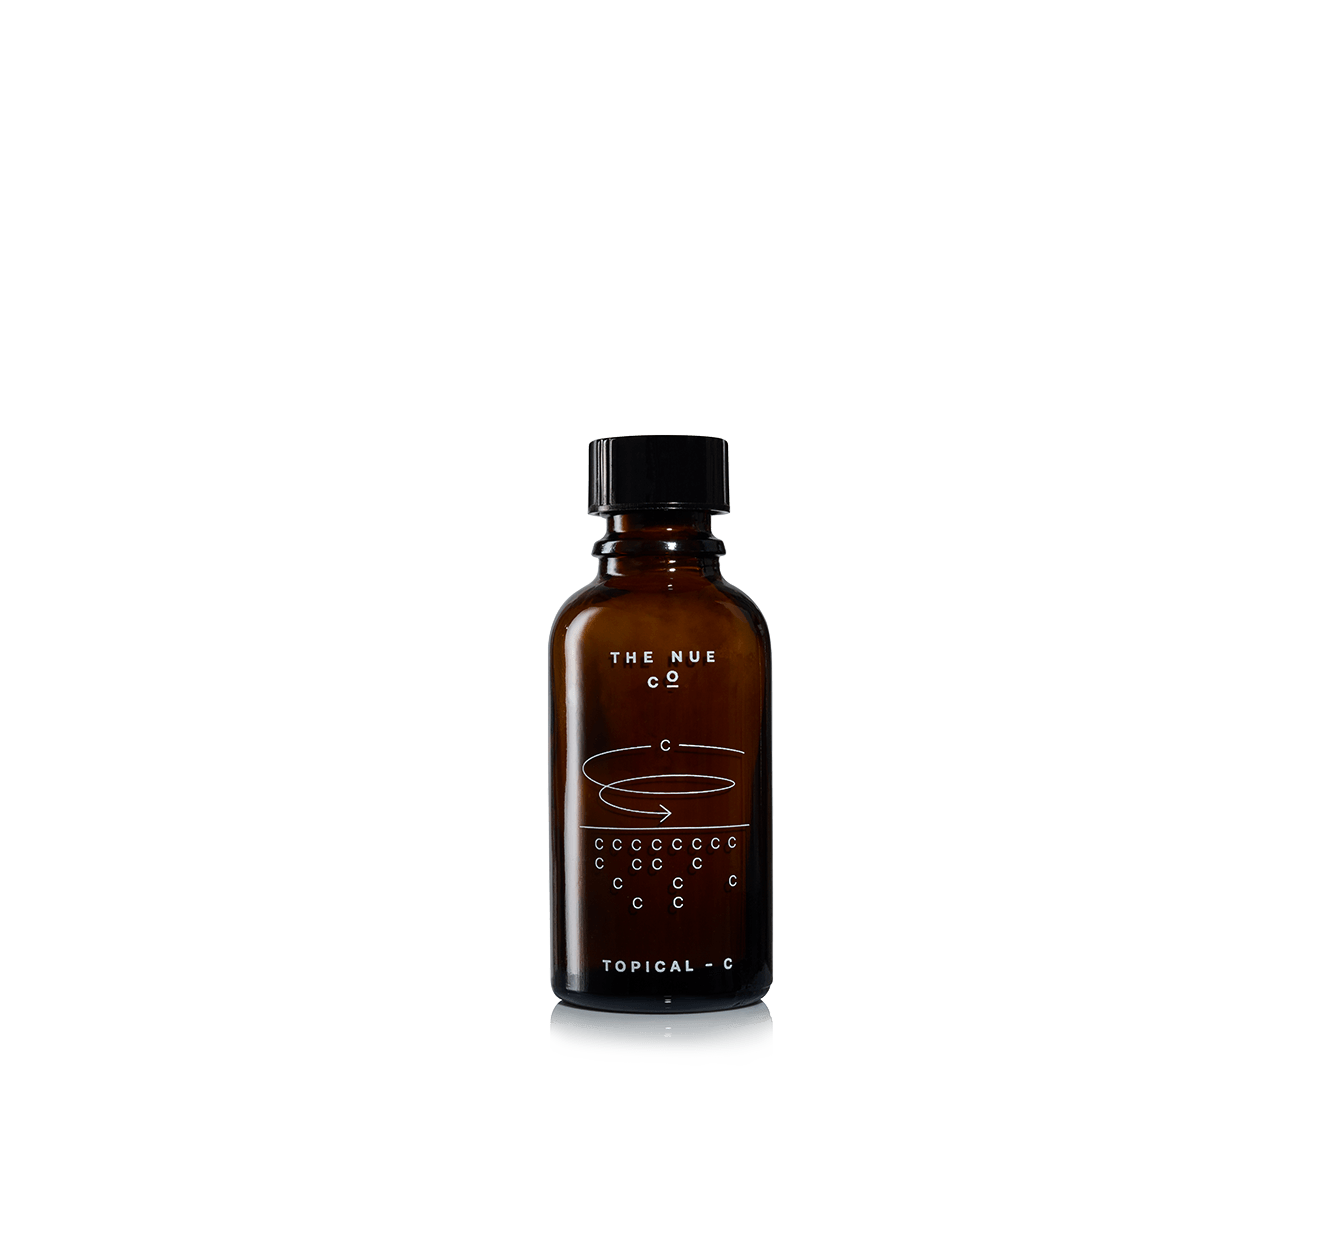 TOPICAL-C single The Nue Co. 15ml 